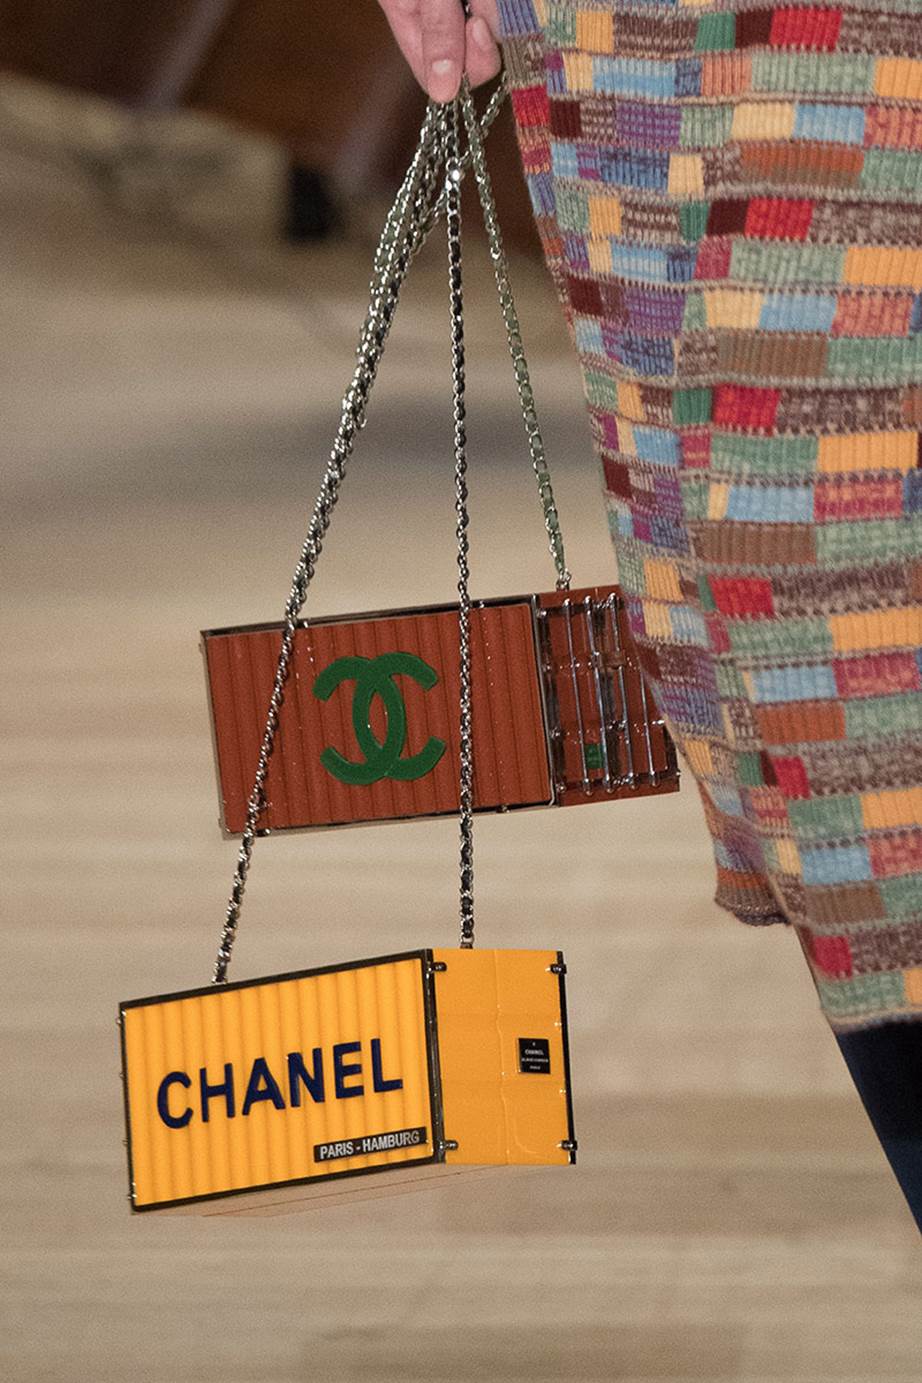 Chanel Shipping Containers Minaudiere Paris-Hamburg Metiers d'Art 2018